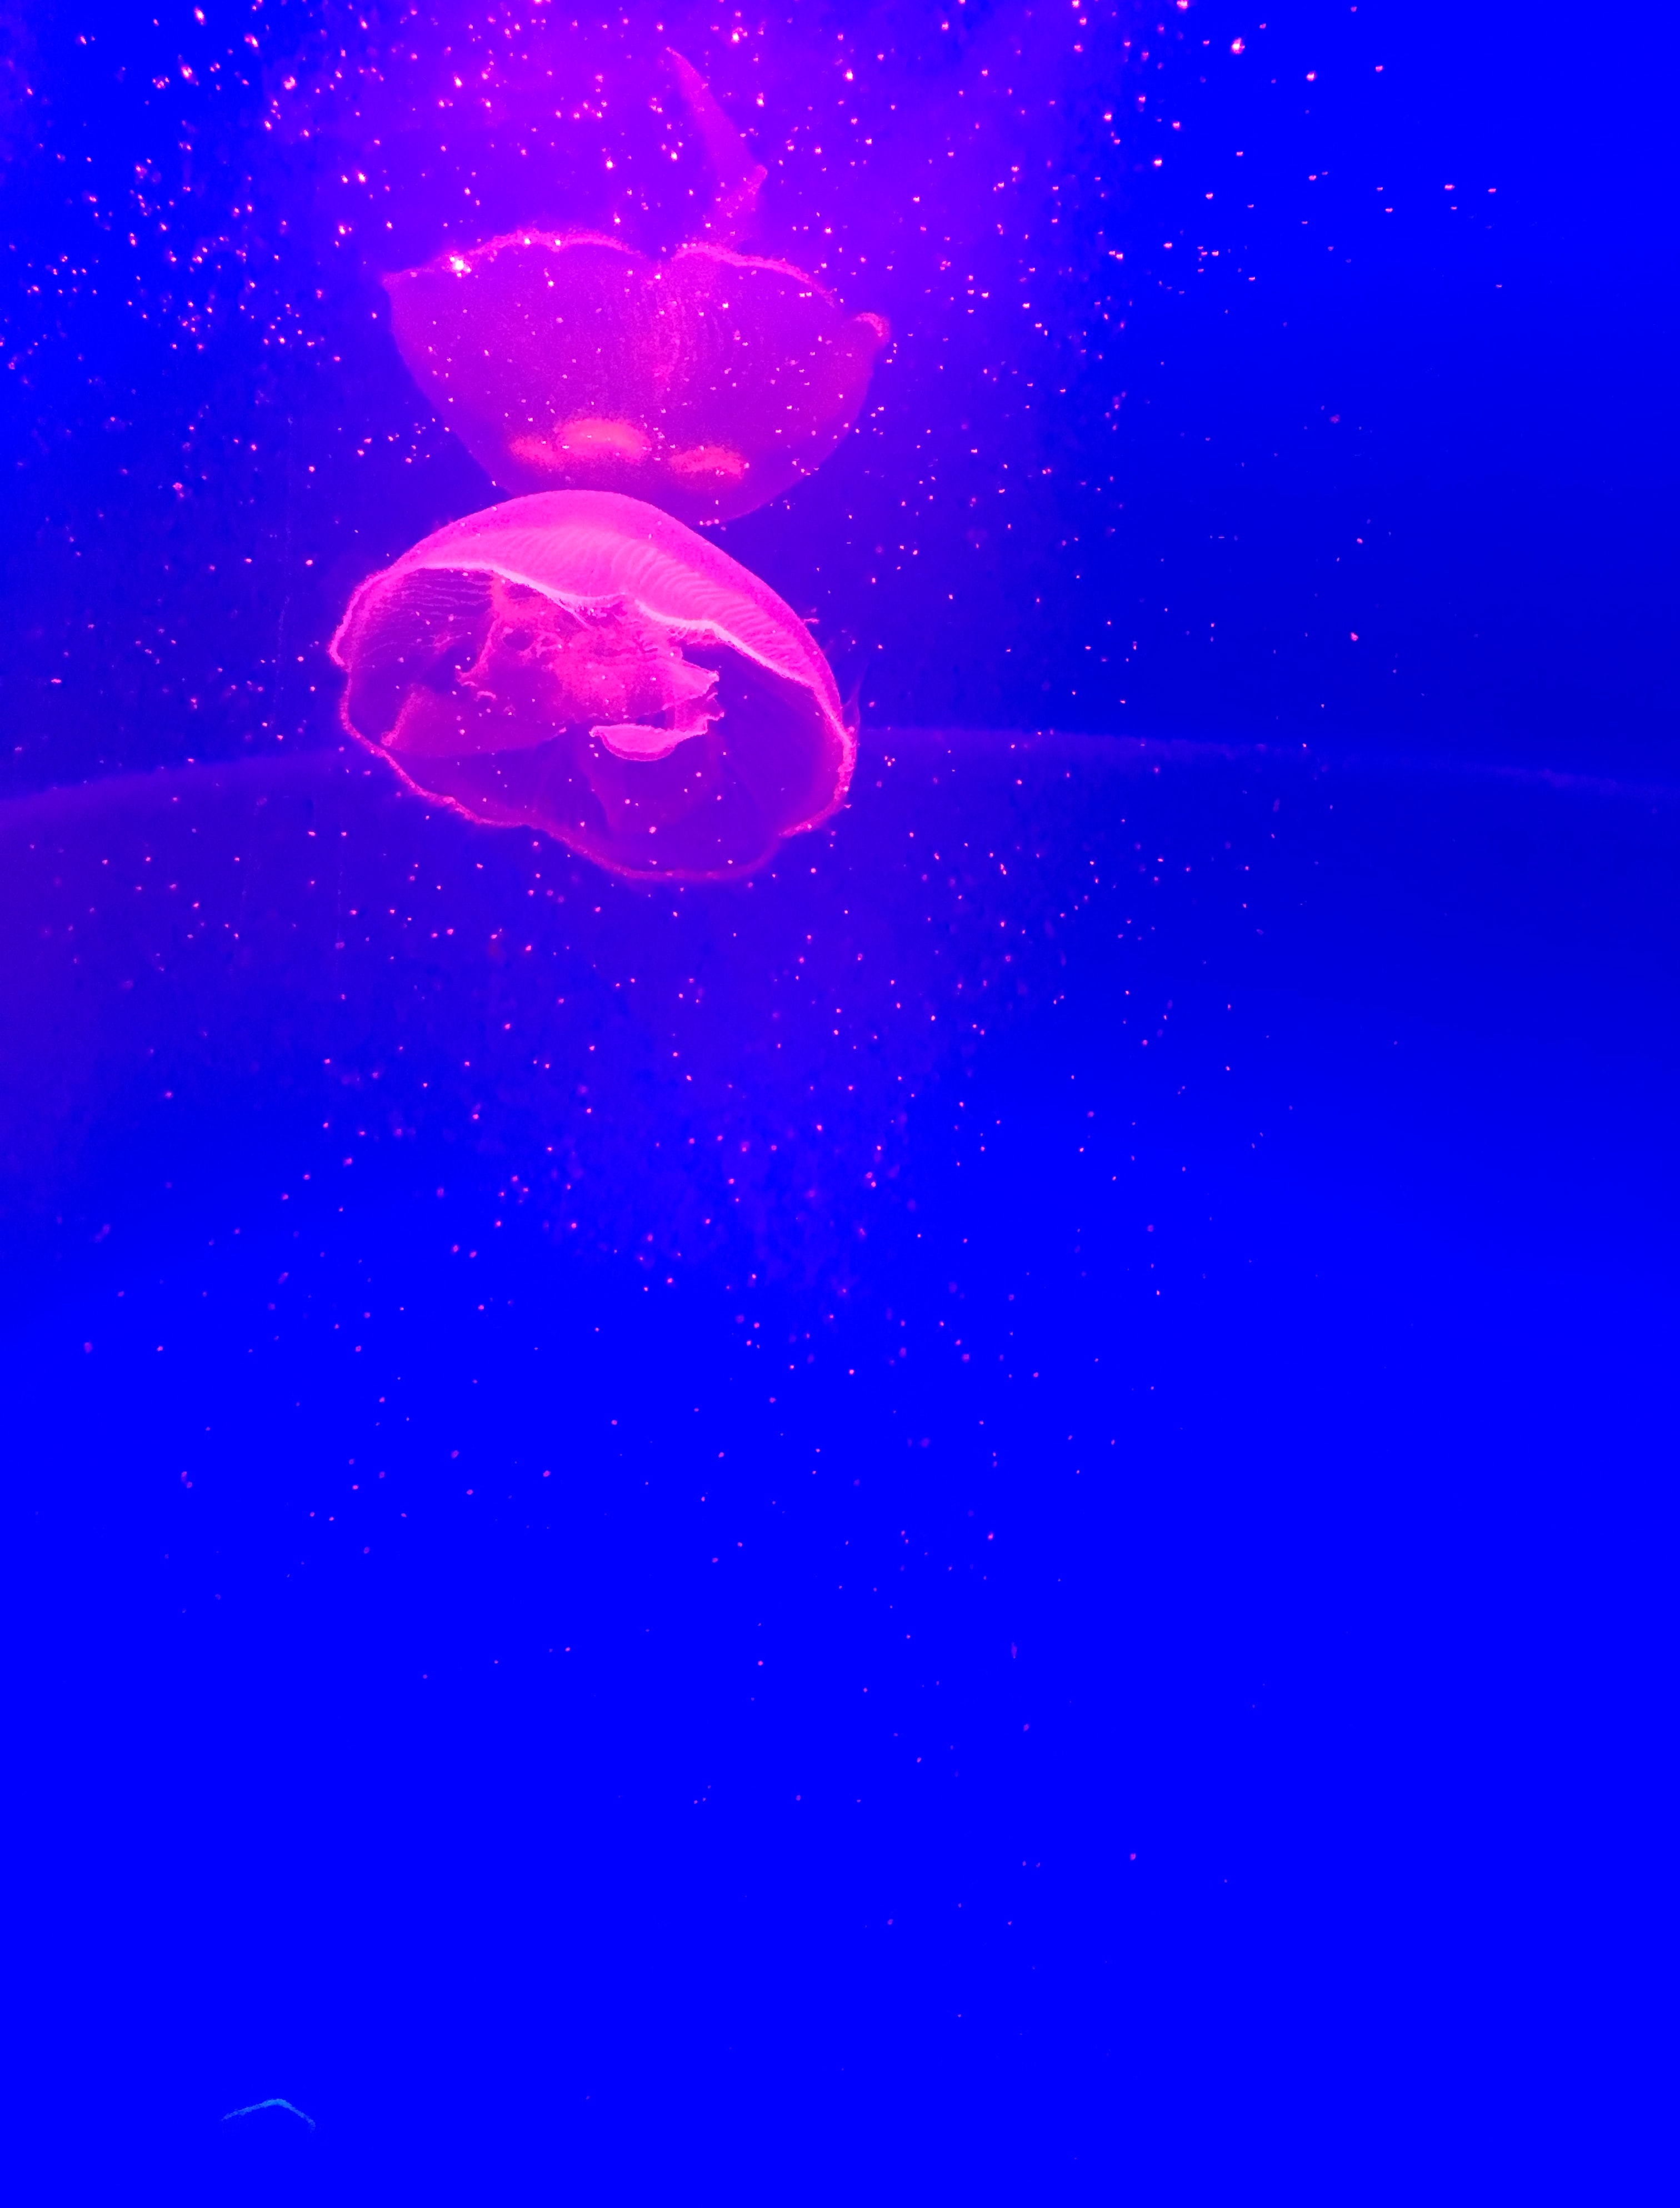 Windows Backgrounds jellyfish, animals, pink, blue, particles, tentacle